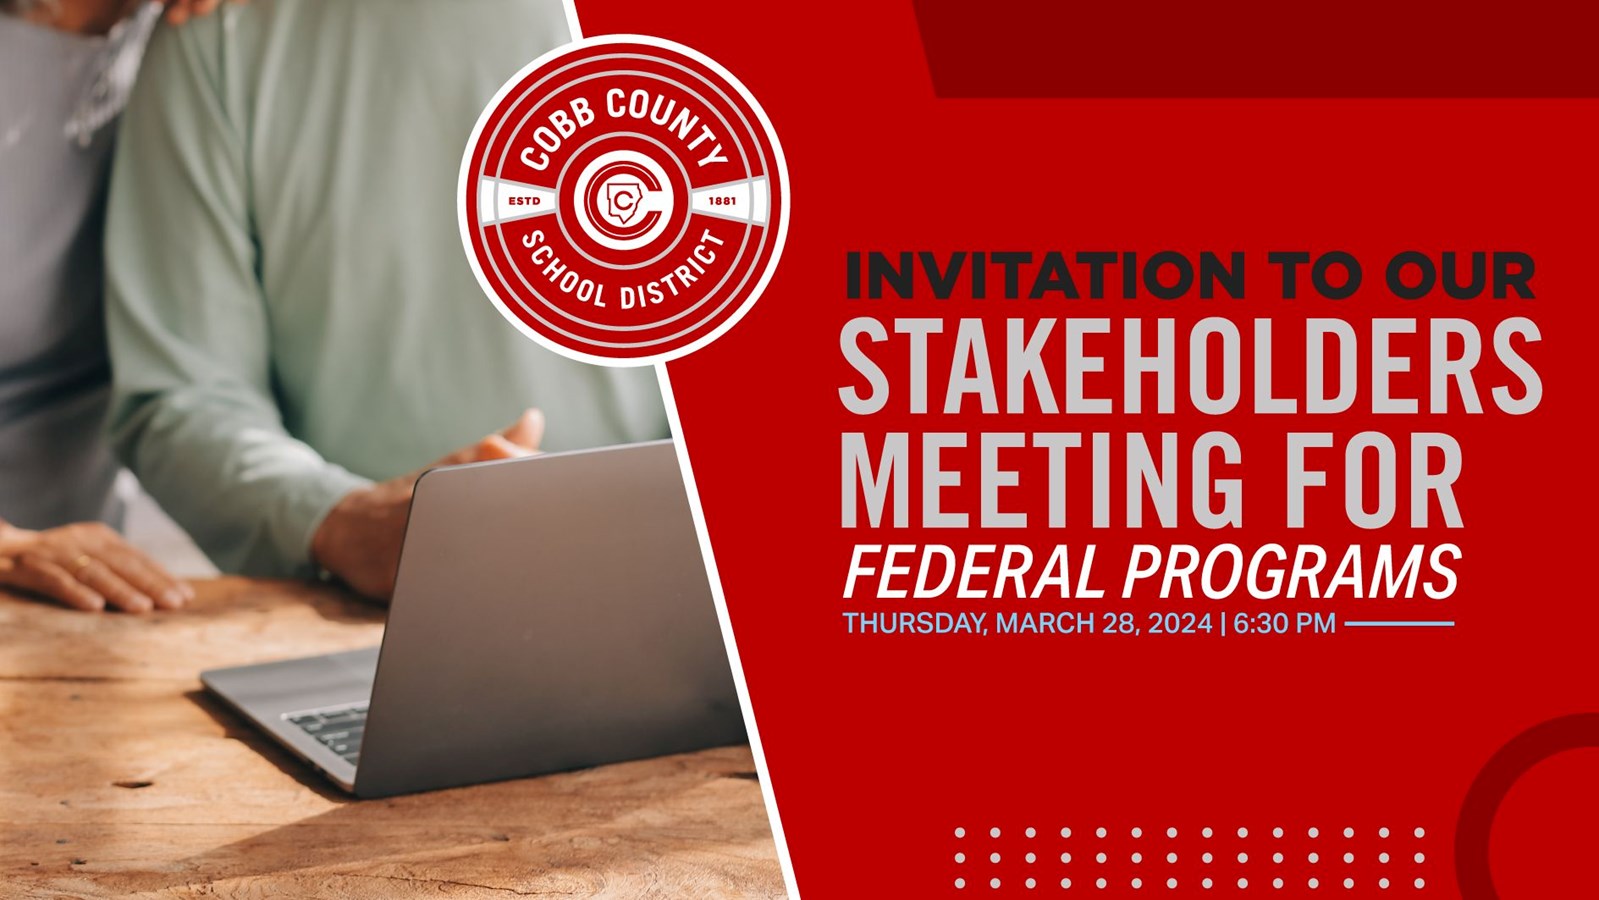 Annual Stakeholders Meeting for Federal Programs